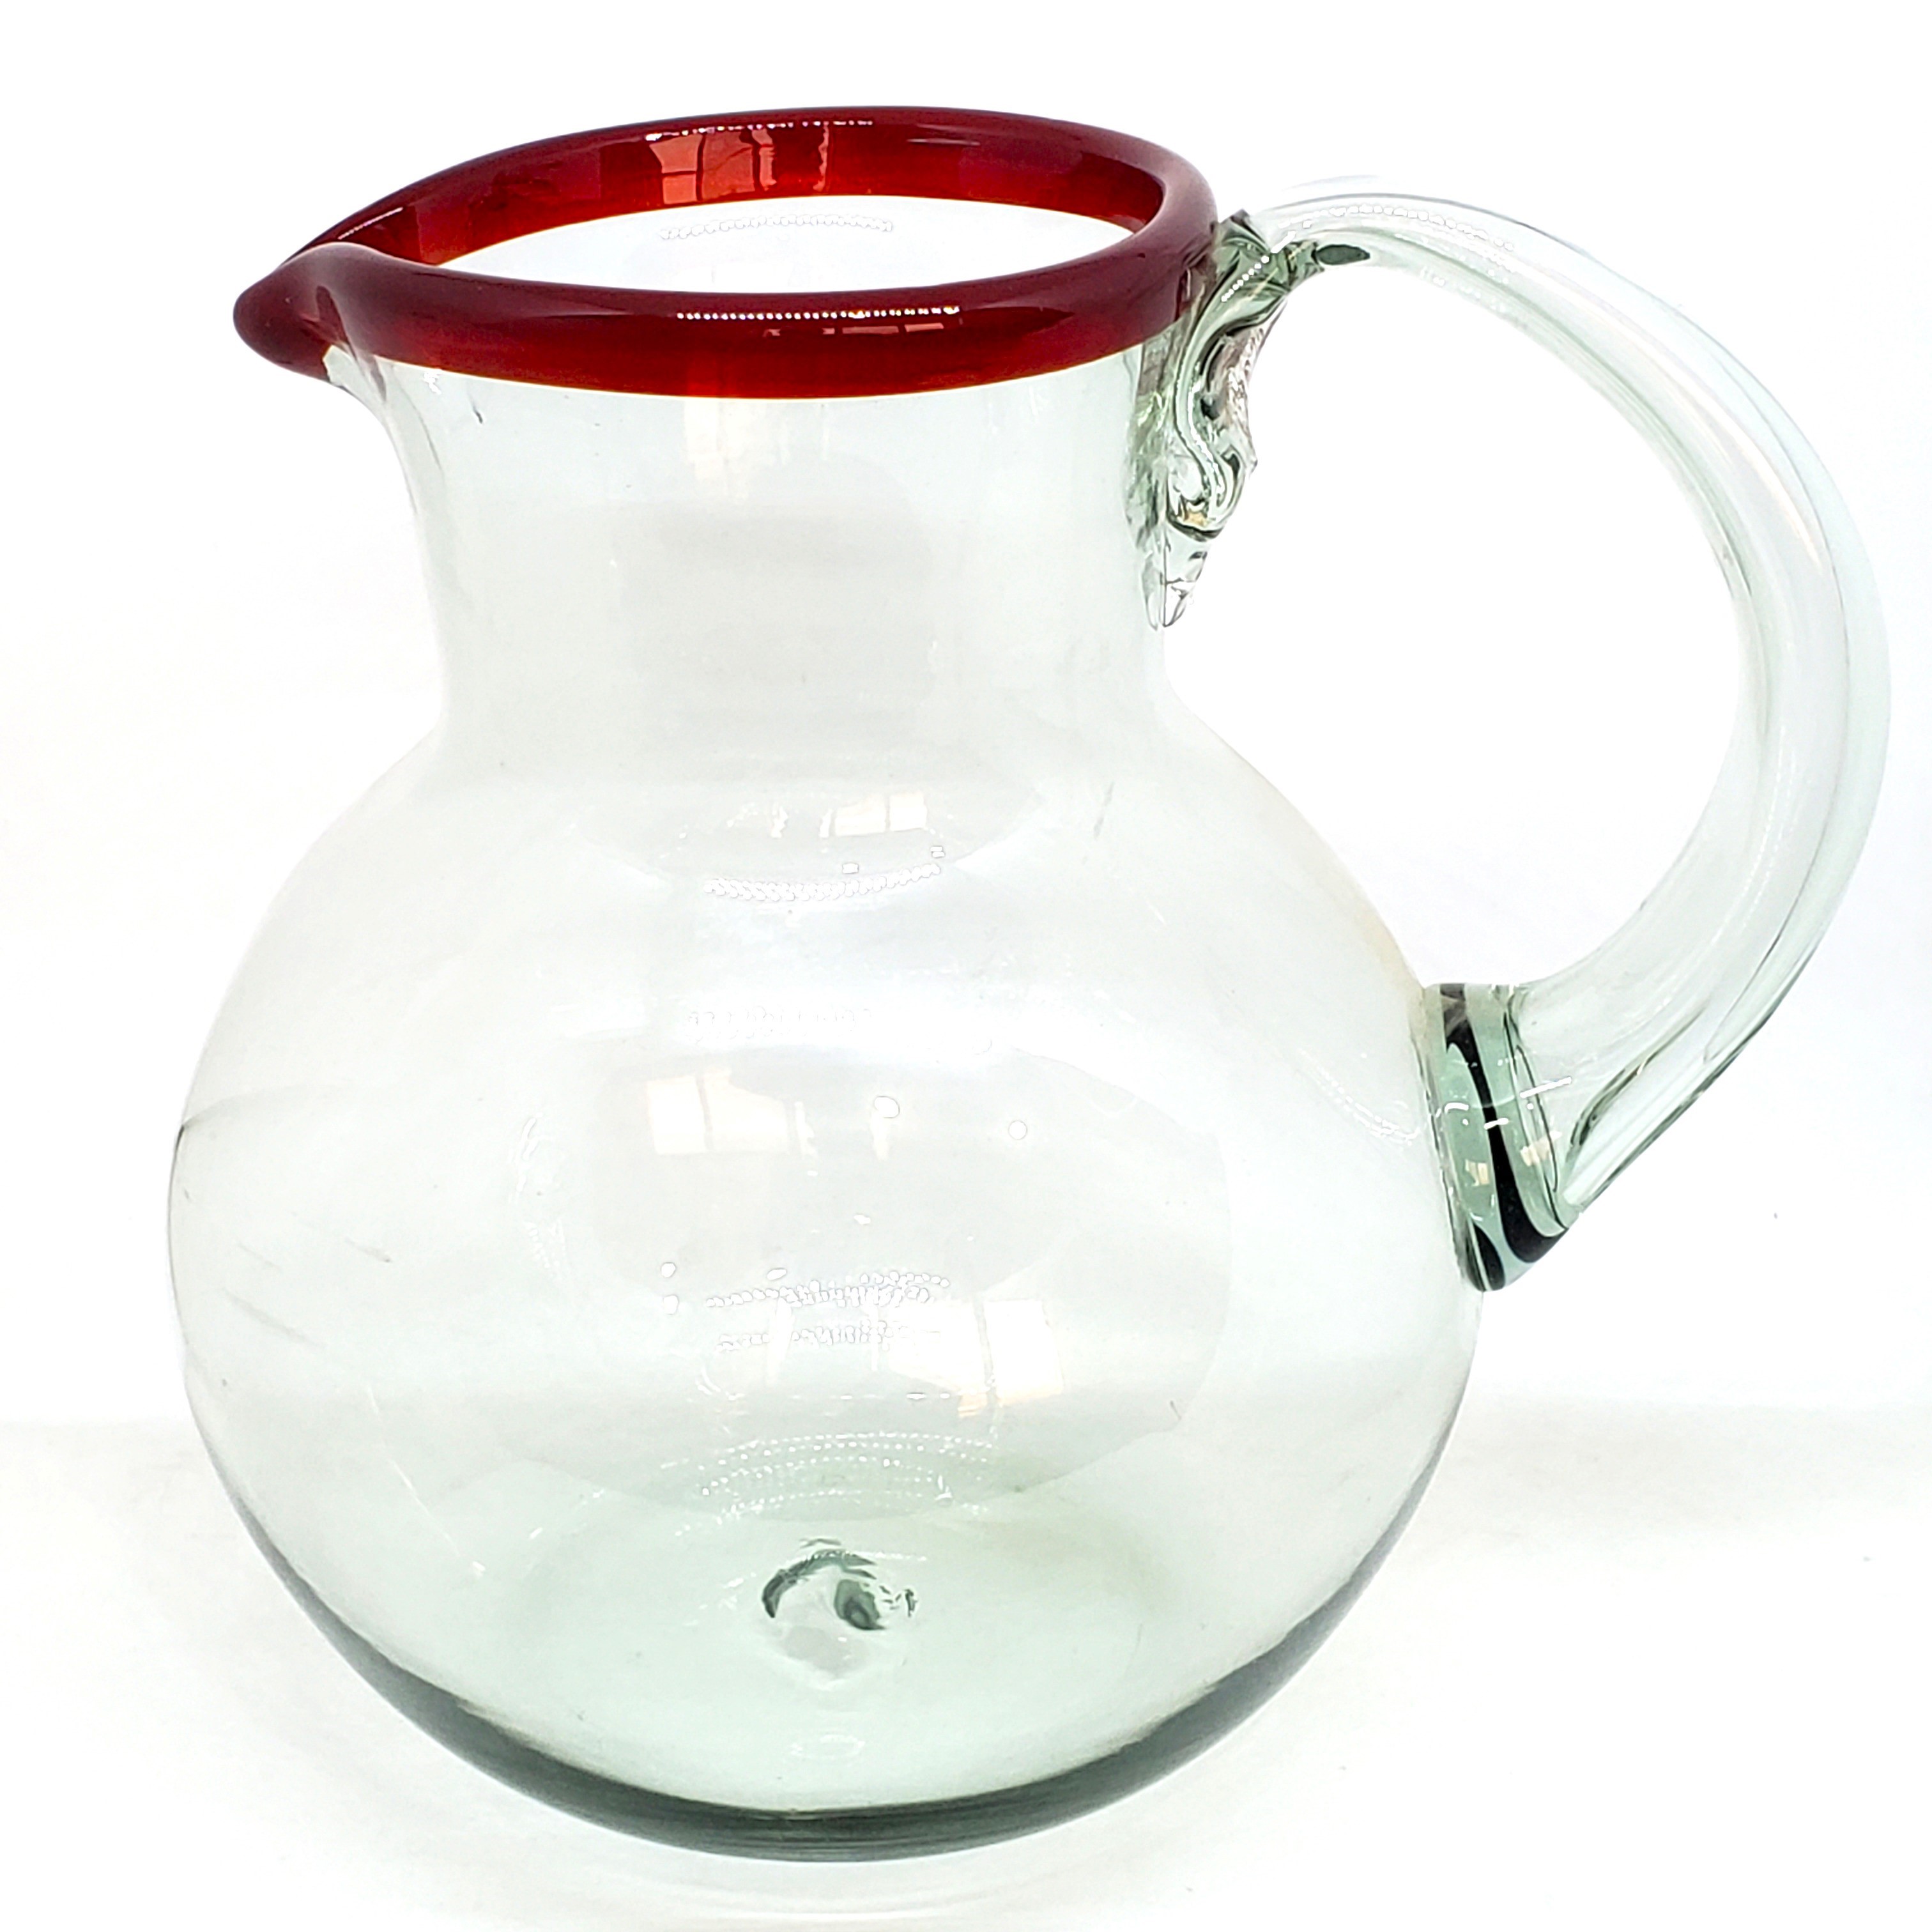 https://mexhandcraft.com/imgProducts/Ruby%20Red%20Rim%20120%20oz%20Large%20Bola%20Pitcher%20(1).jpg